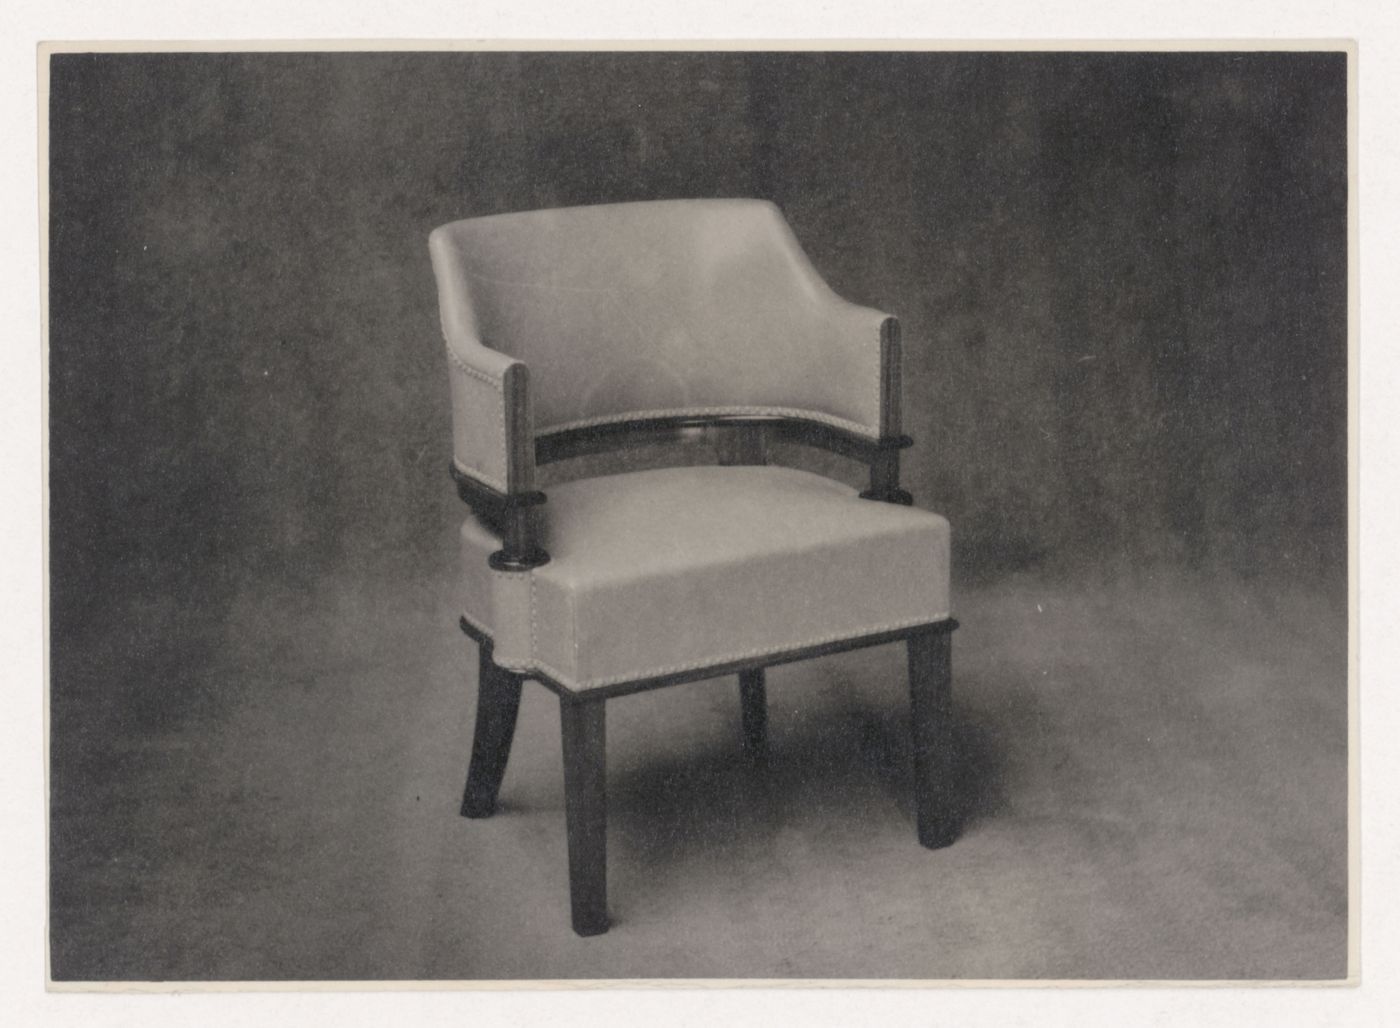 View of an armchair designed by J.J.P. Oud for the director's office of the Shell Building, The Hague, Netherlands